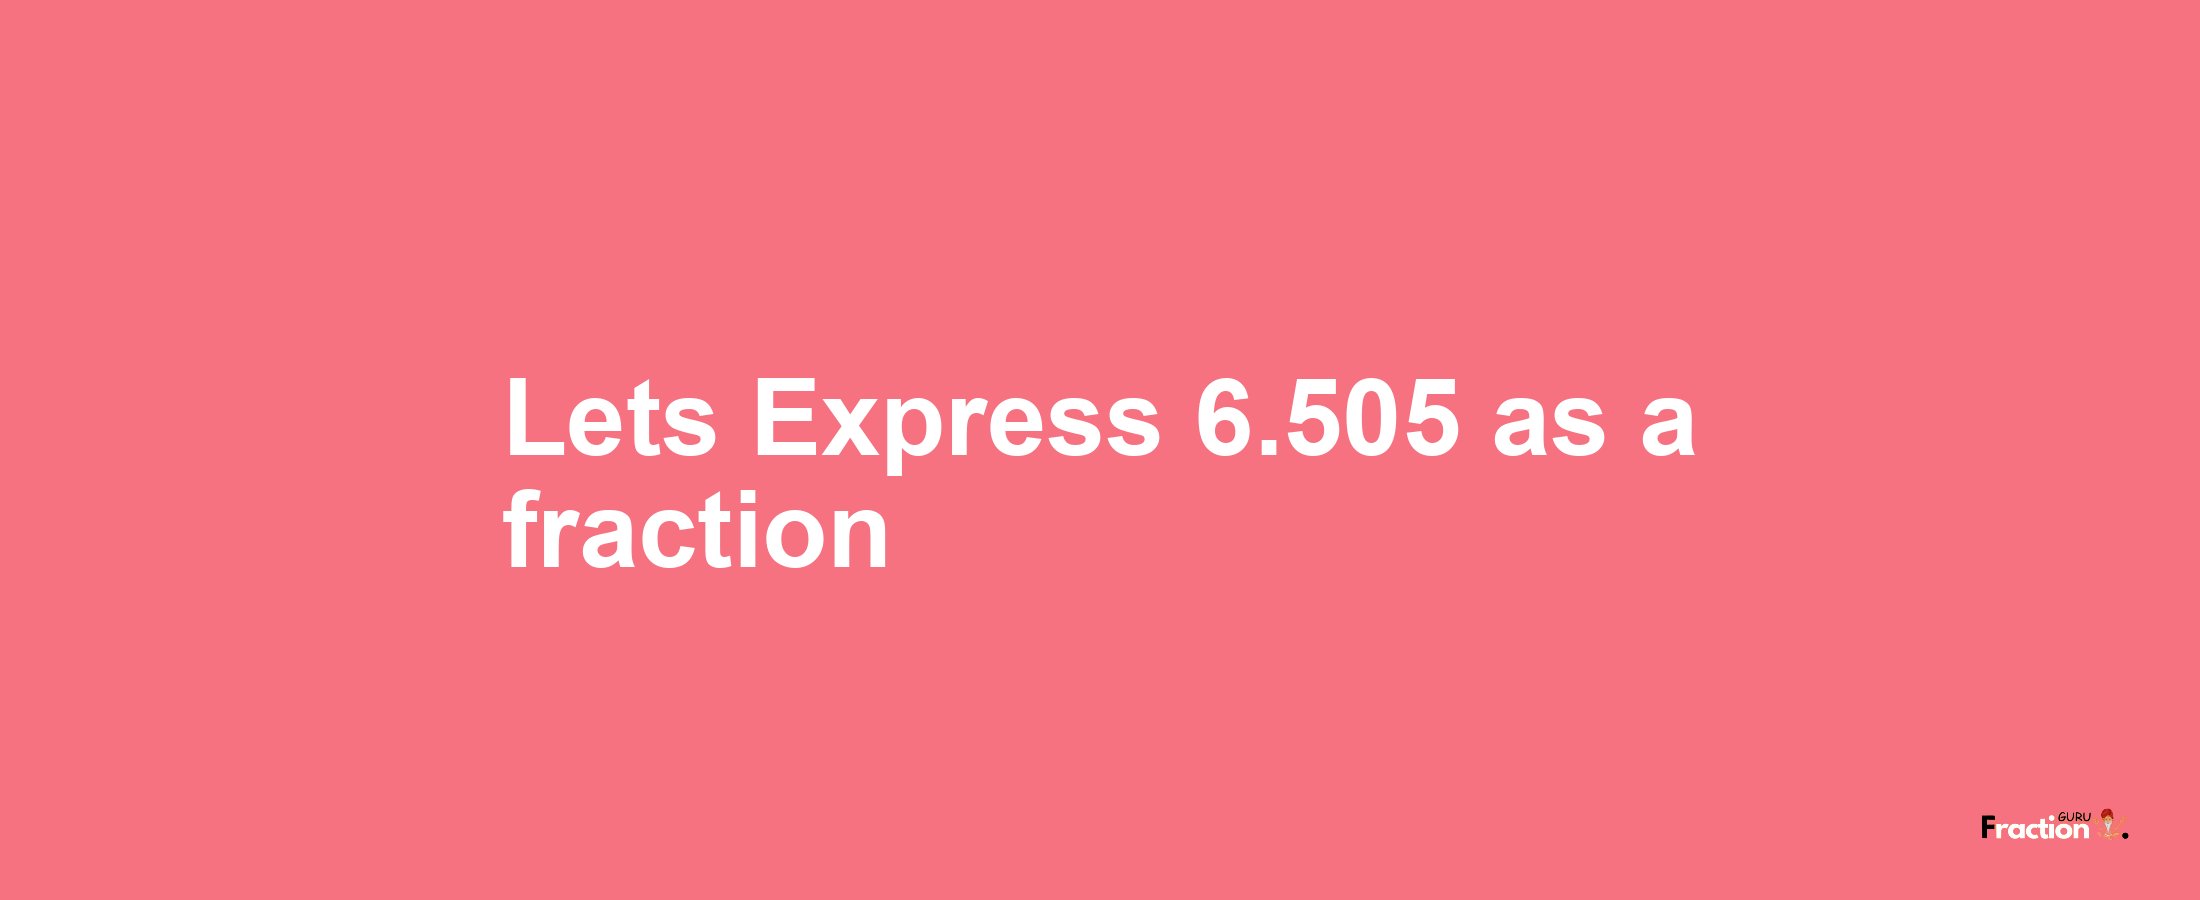 Lets Express 6.505 as afraction